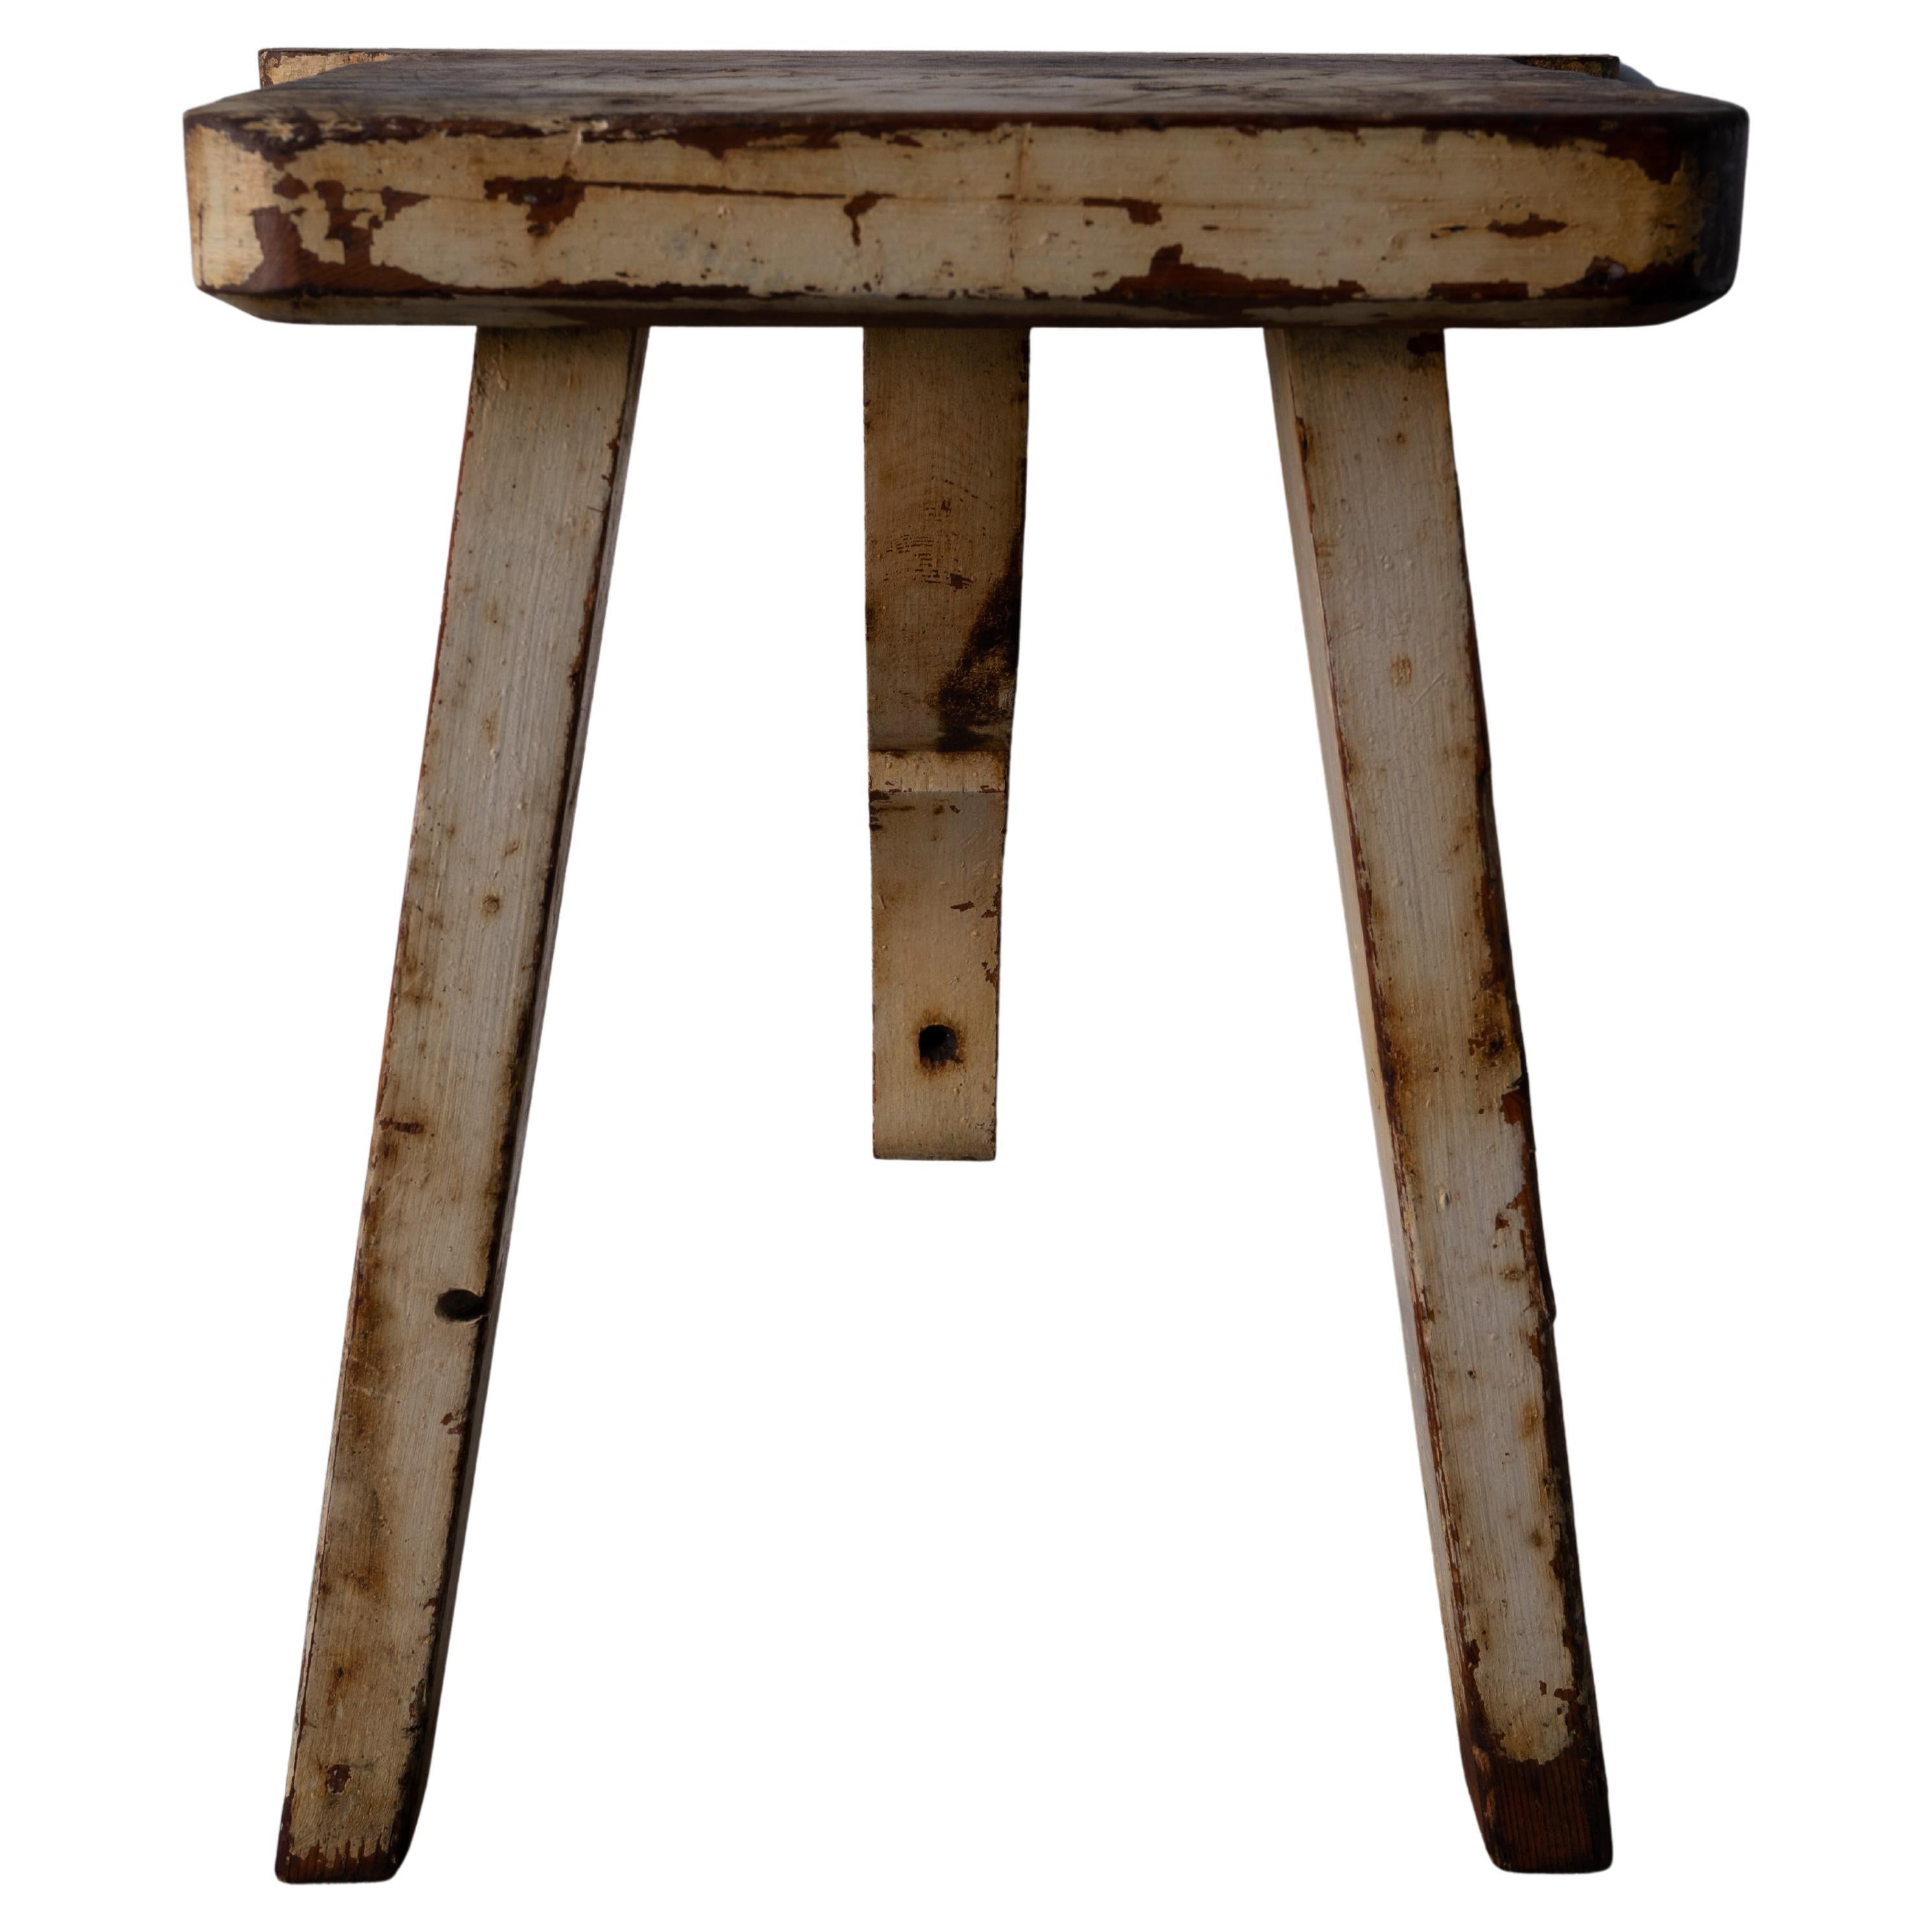 Swedish Designer, Wall Mounted Stool, Painted Wood, Sweden, Early 20th Century